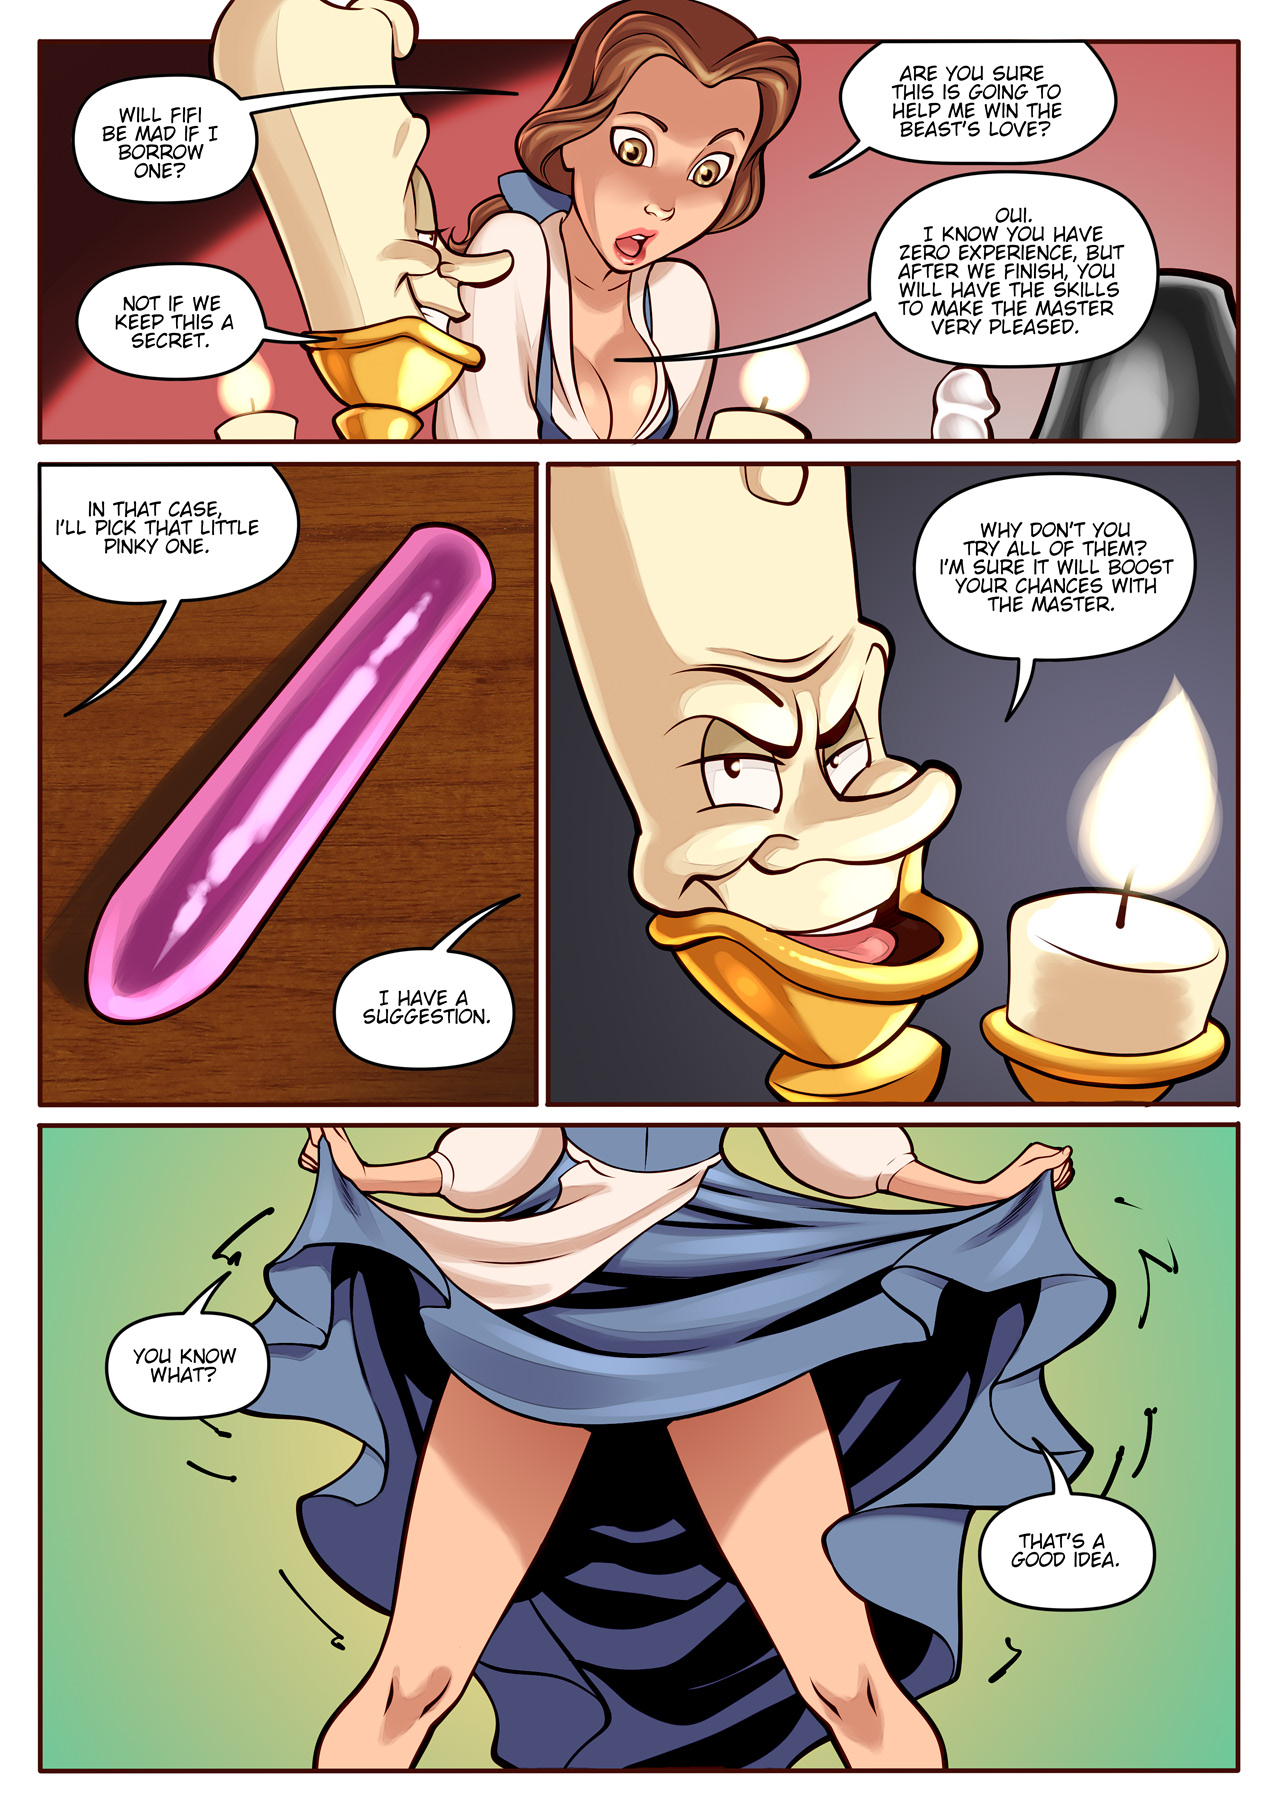 Porn Captions Beauty And The Beast - To Tame the Beast (beauty and the beast) porn comic by [r-ex]. Sex toys porn  comics.